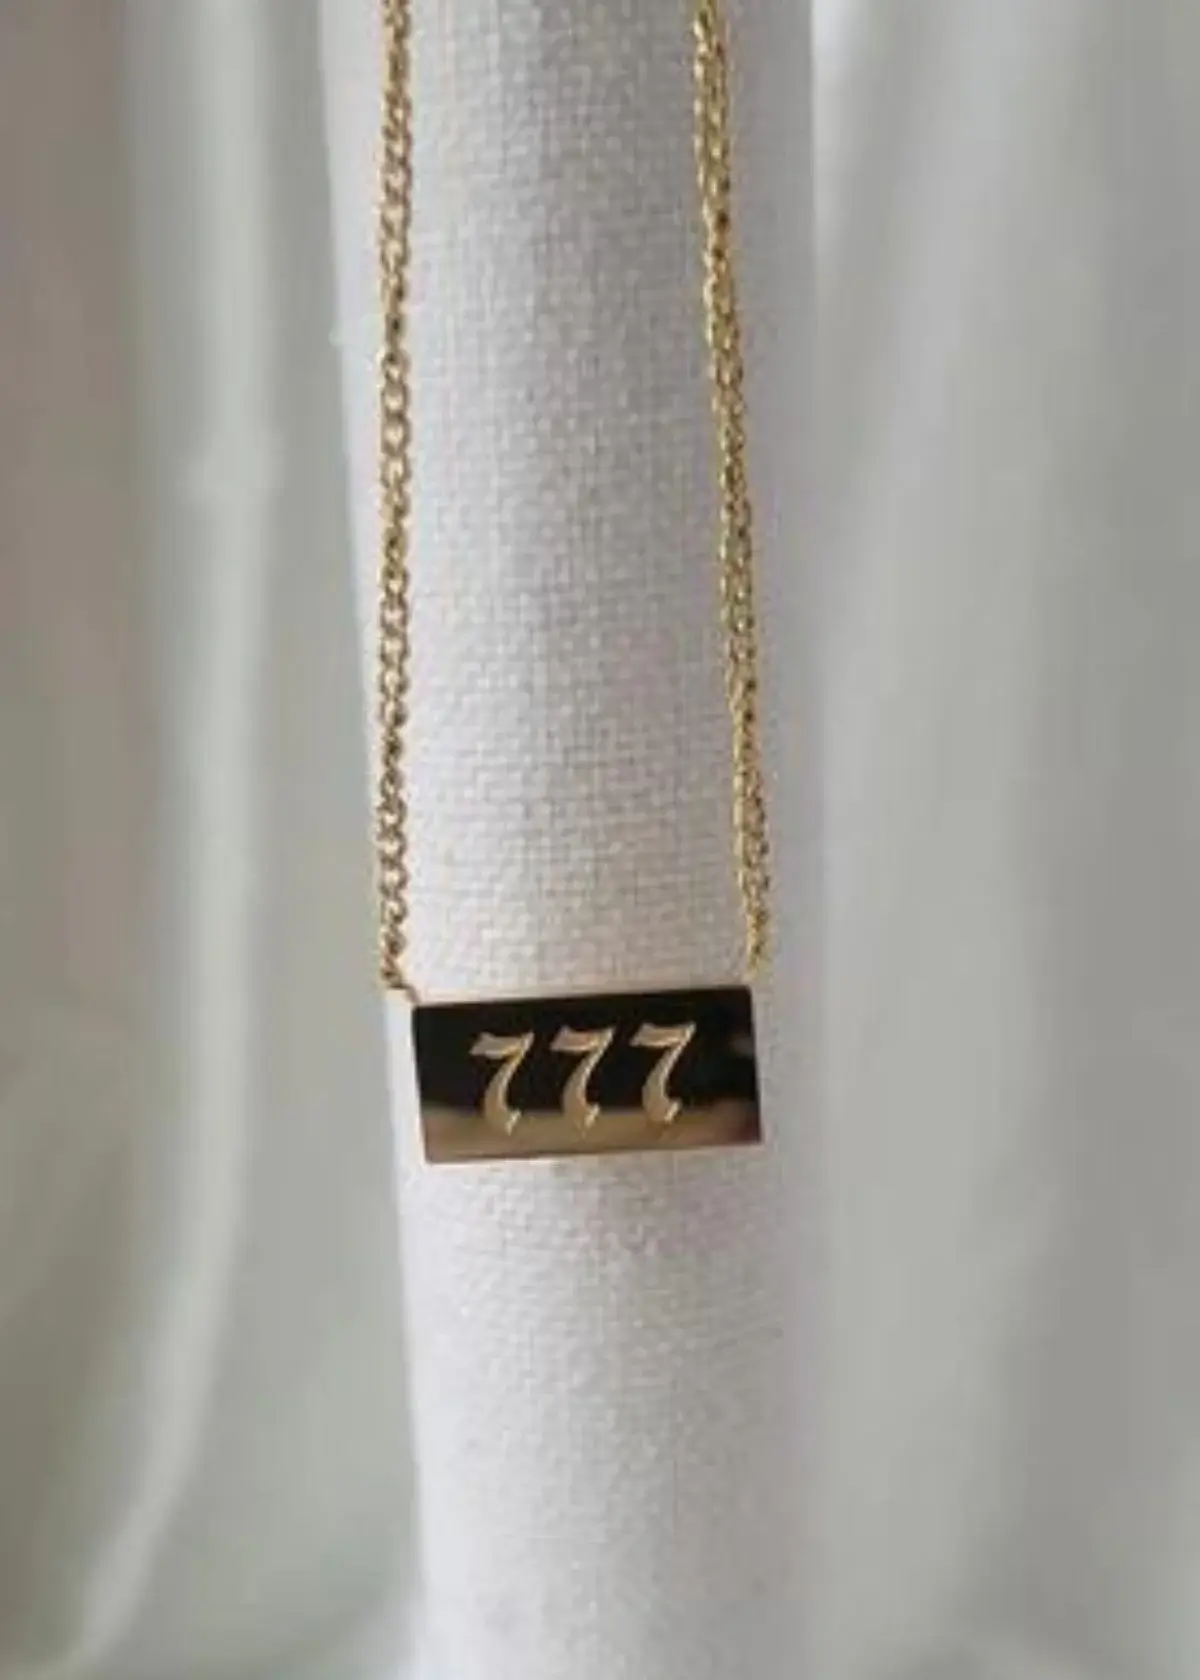 what does 777 mean on a necklace?